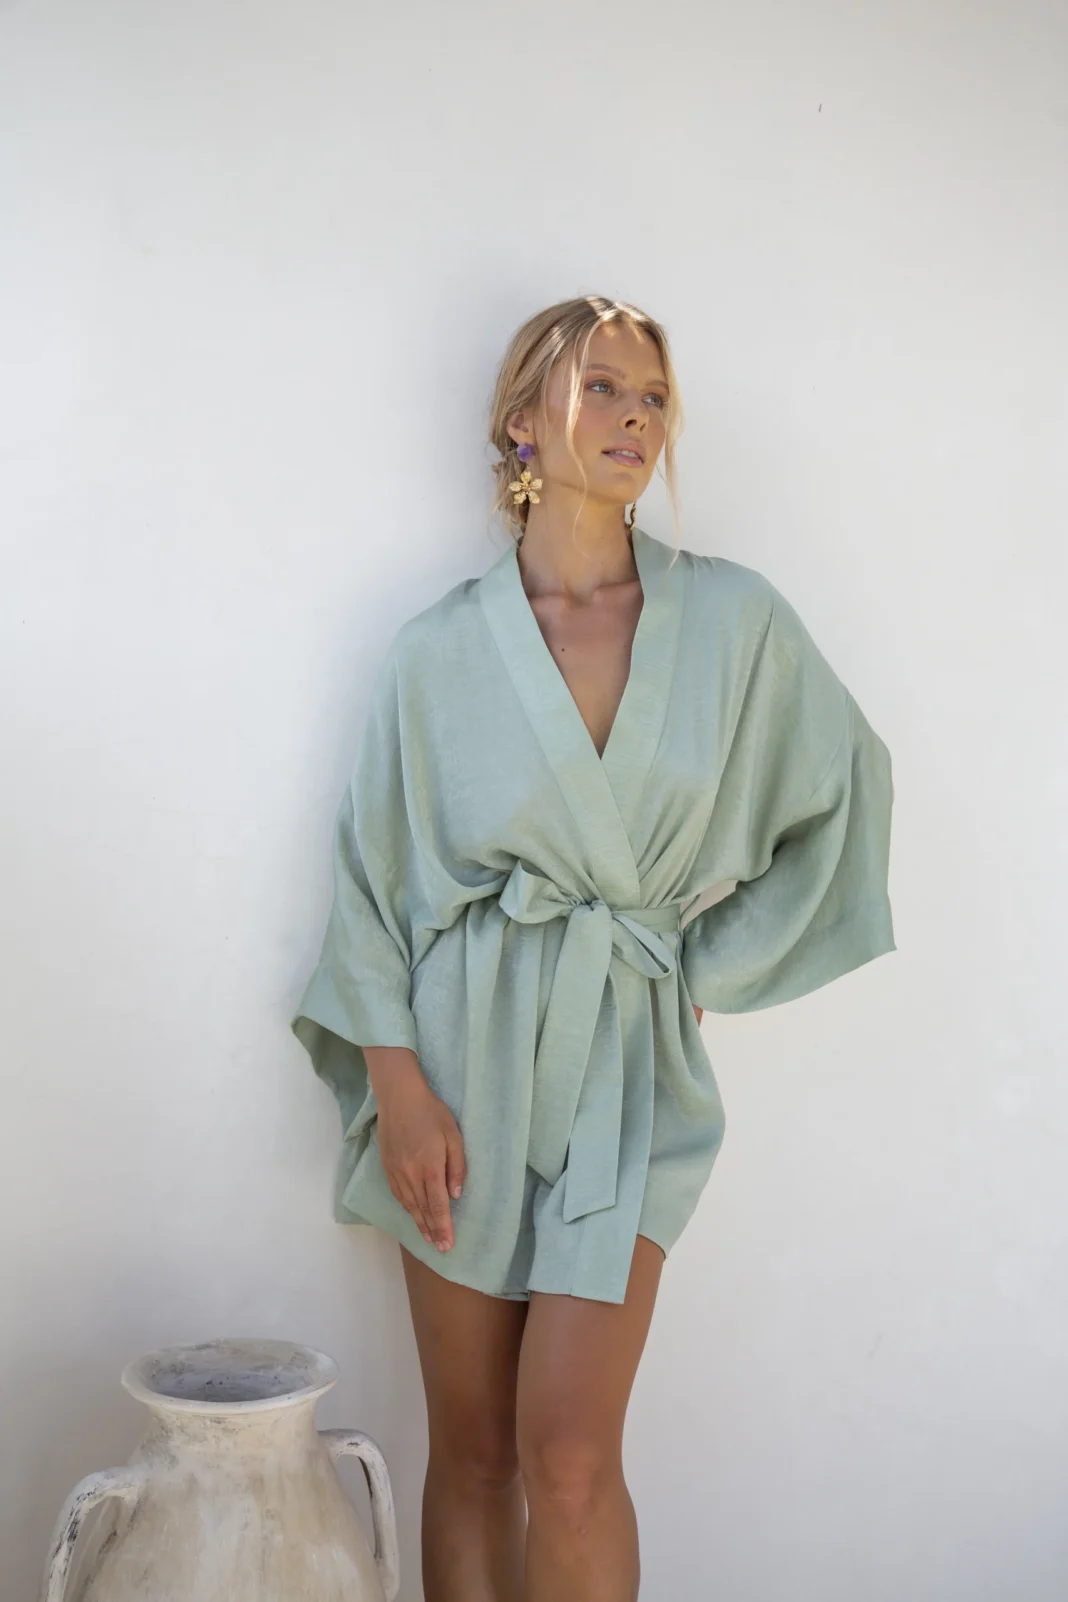 Luxurious Satin Sage Green Bridal Kimono Dressing Gown - Elegance and Comfort Combined